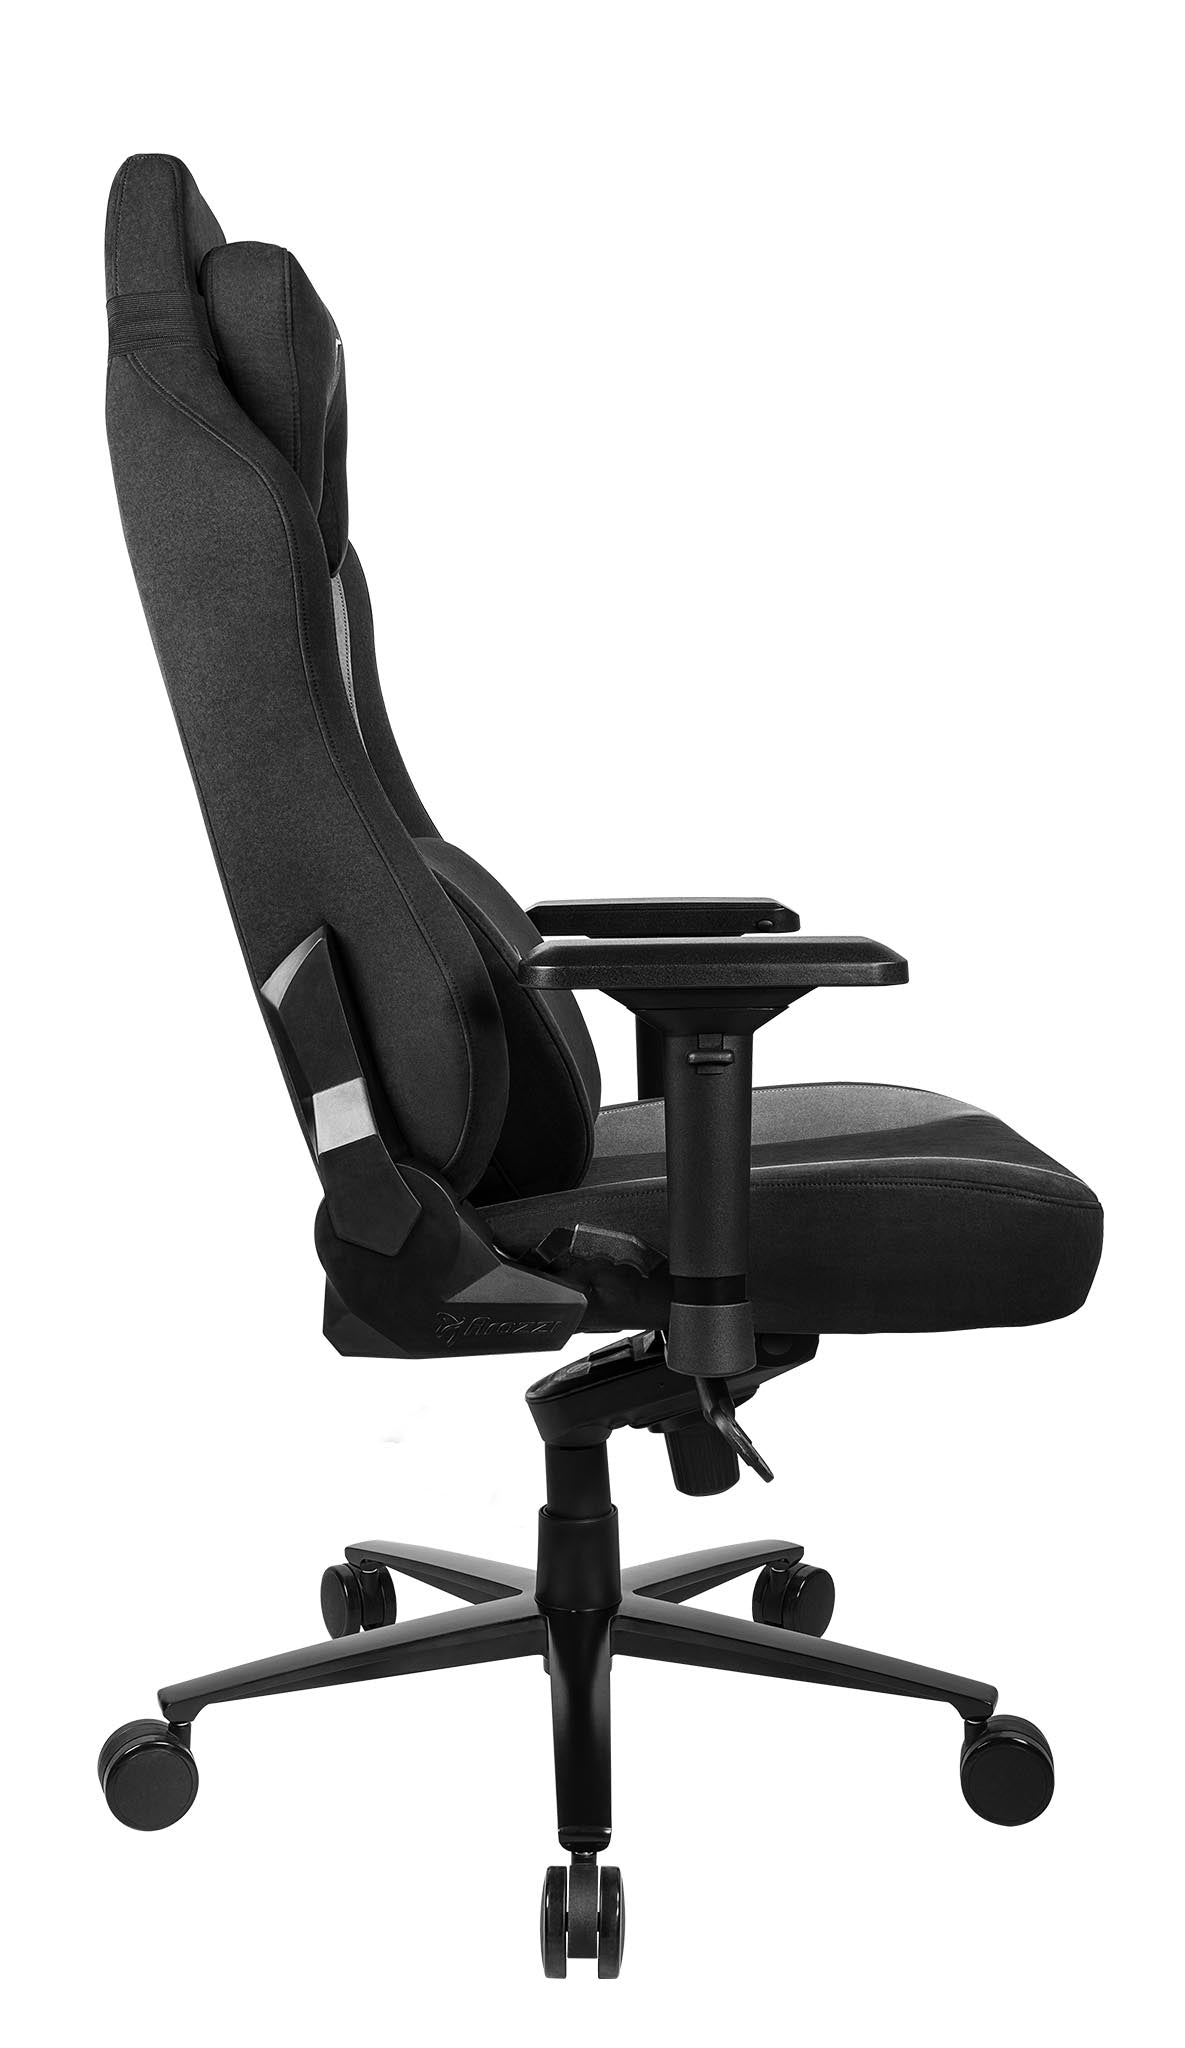 Arozzi Vernazza Supersoft™ Fabric - Black - Level UpArozziGaming Chair850032247238